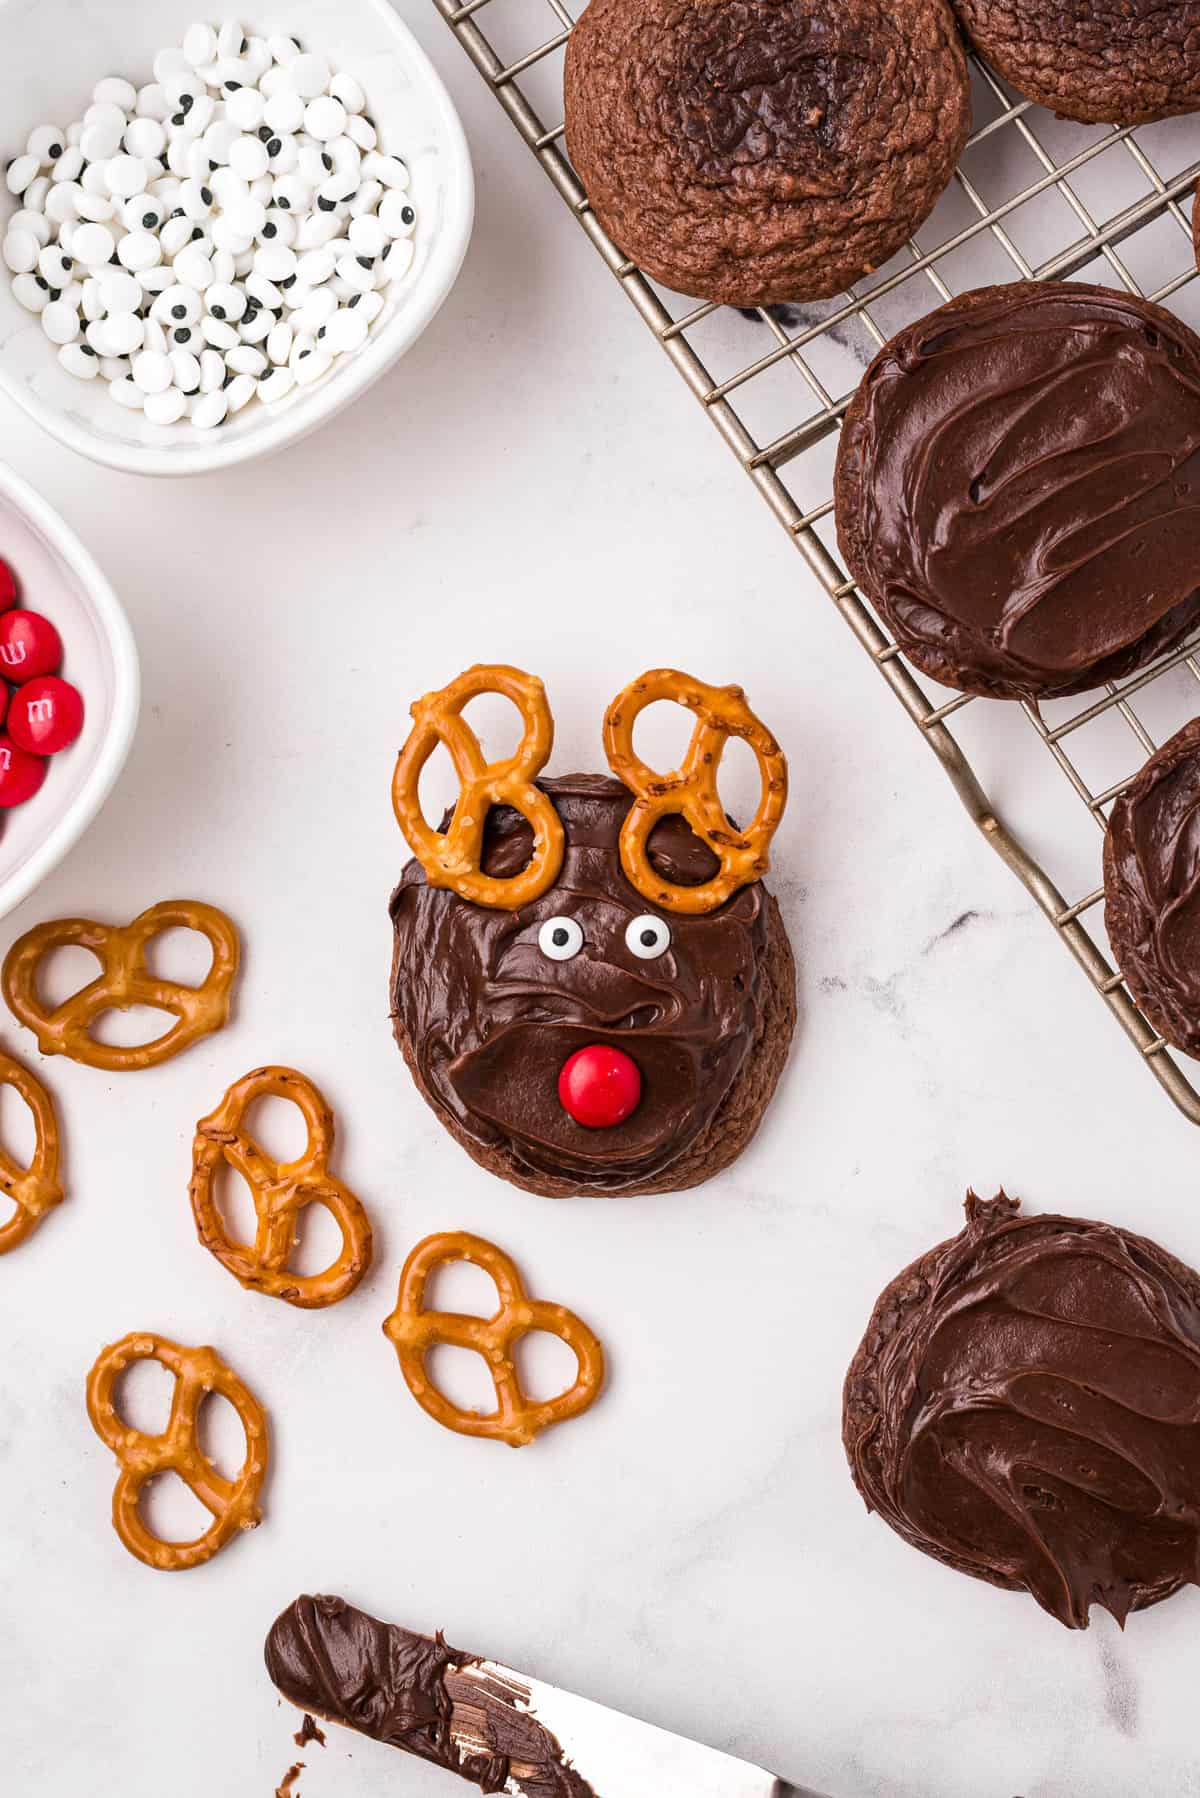 Add two Candy Eyeballs between the antlers and the nose.